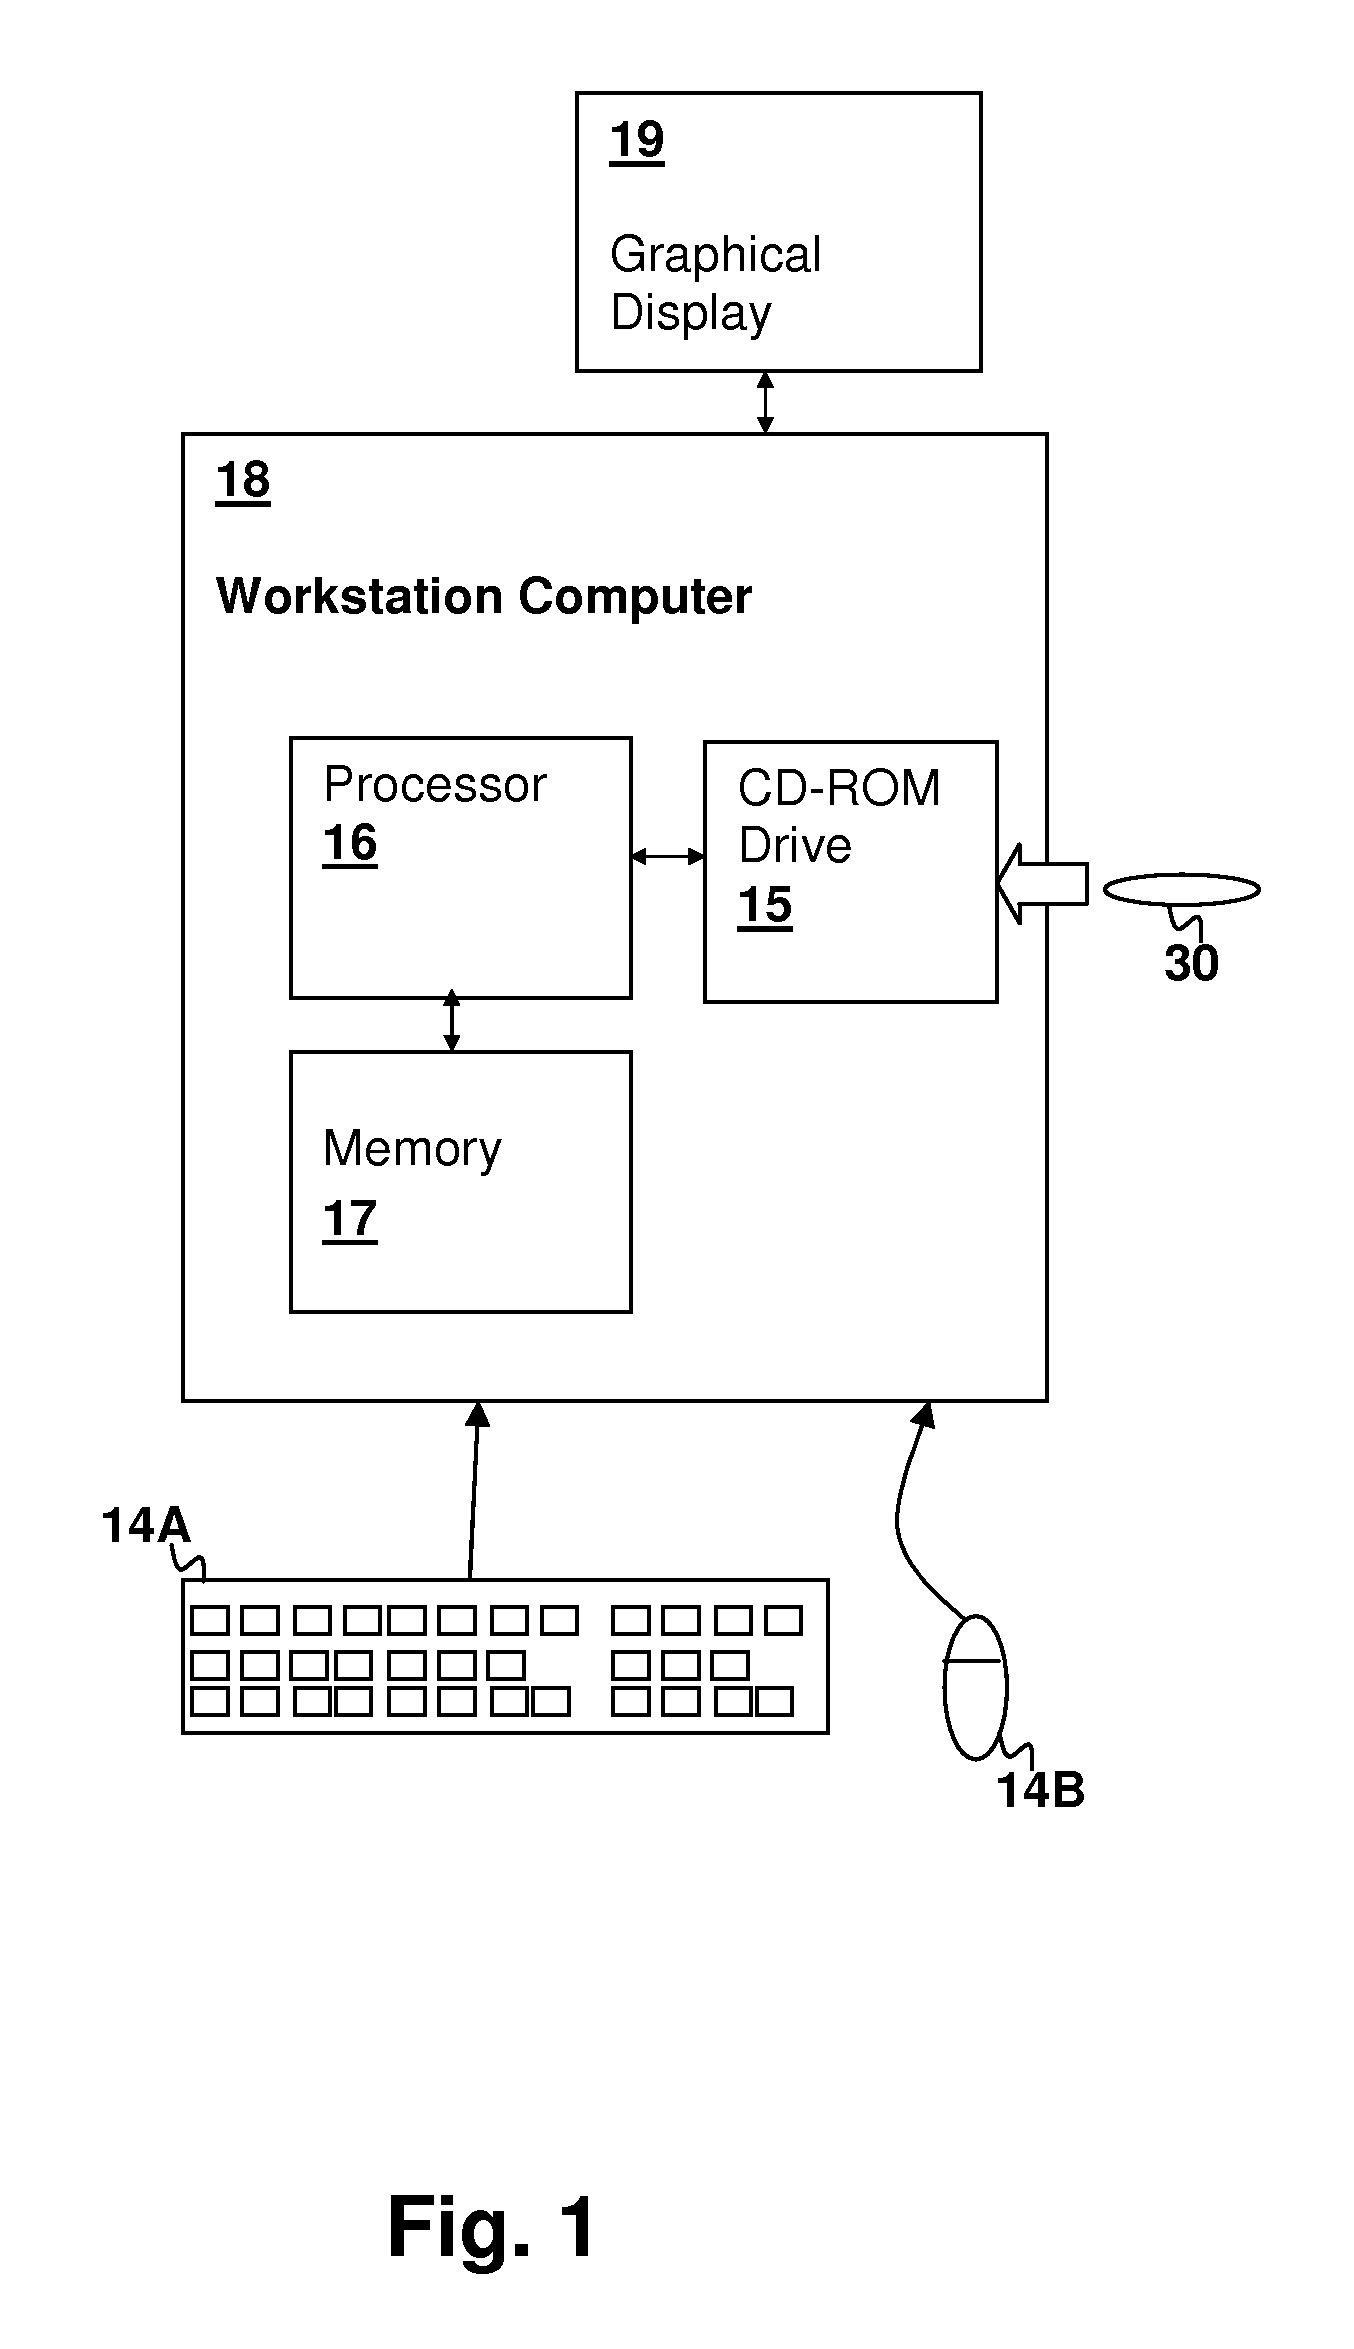 System and computer program for verifying performance of an array by simulating operation of edge cells in a full array model